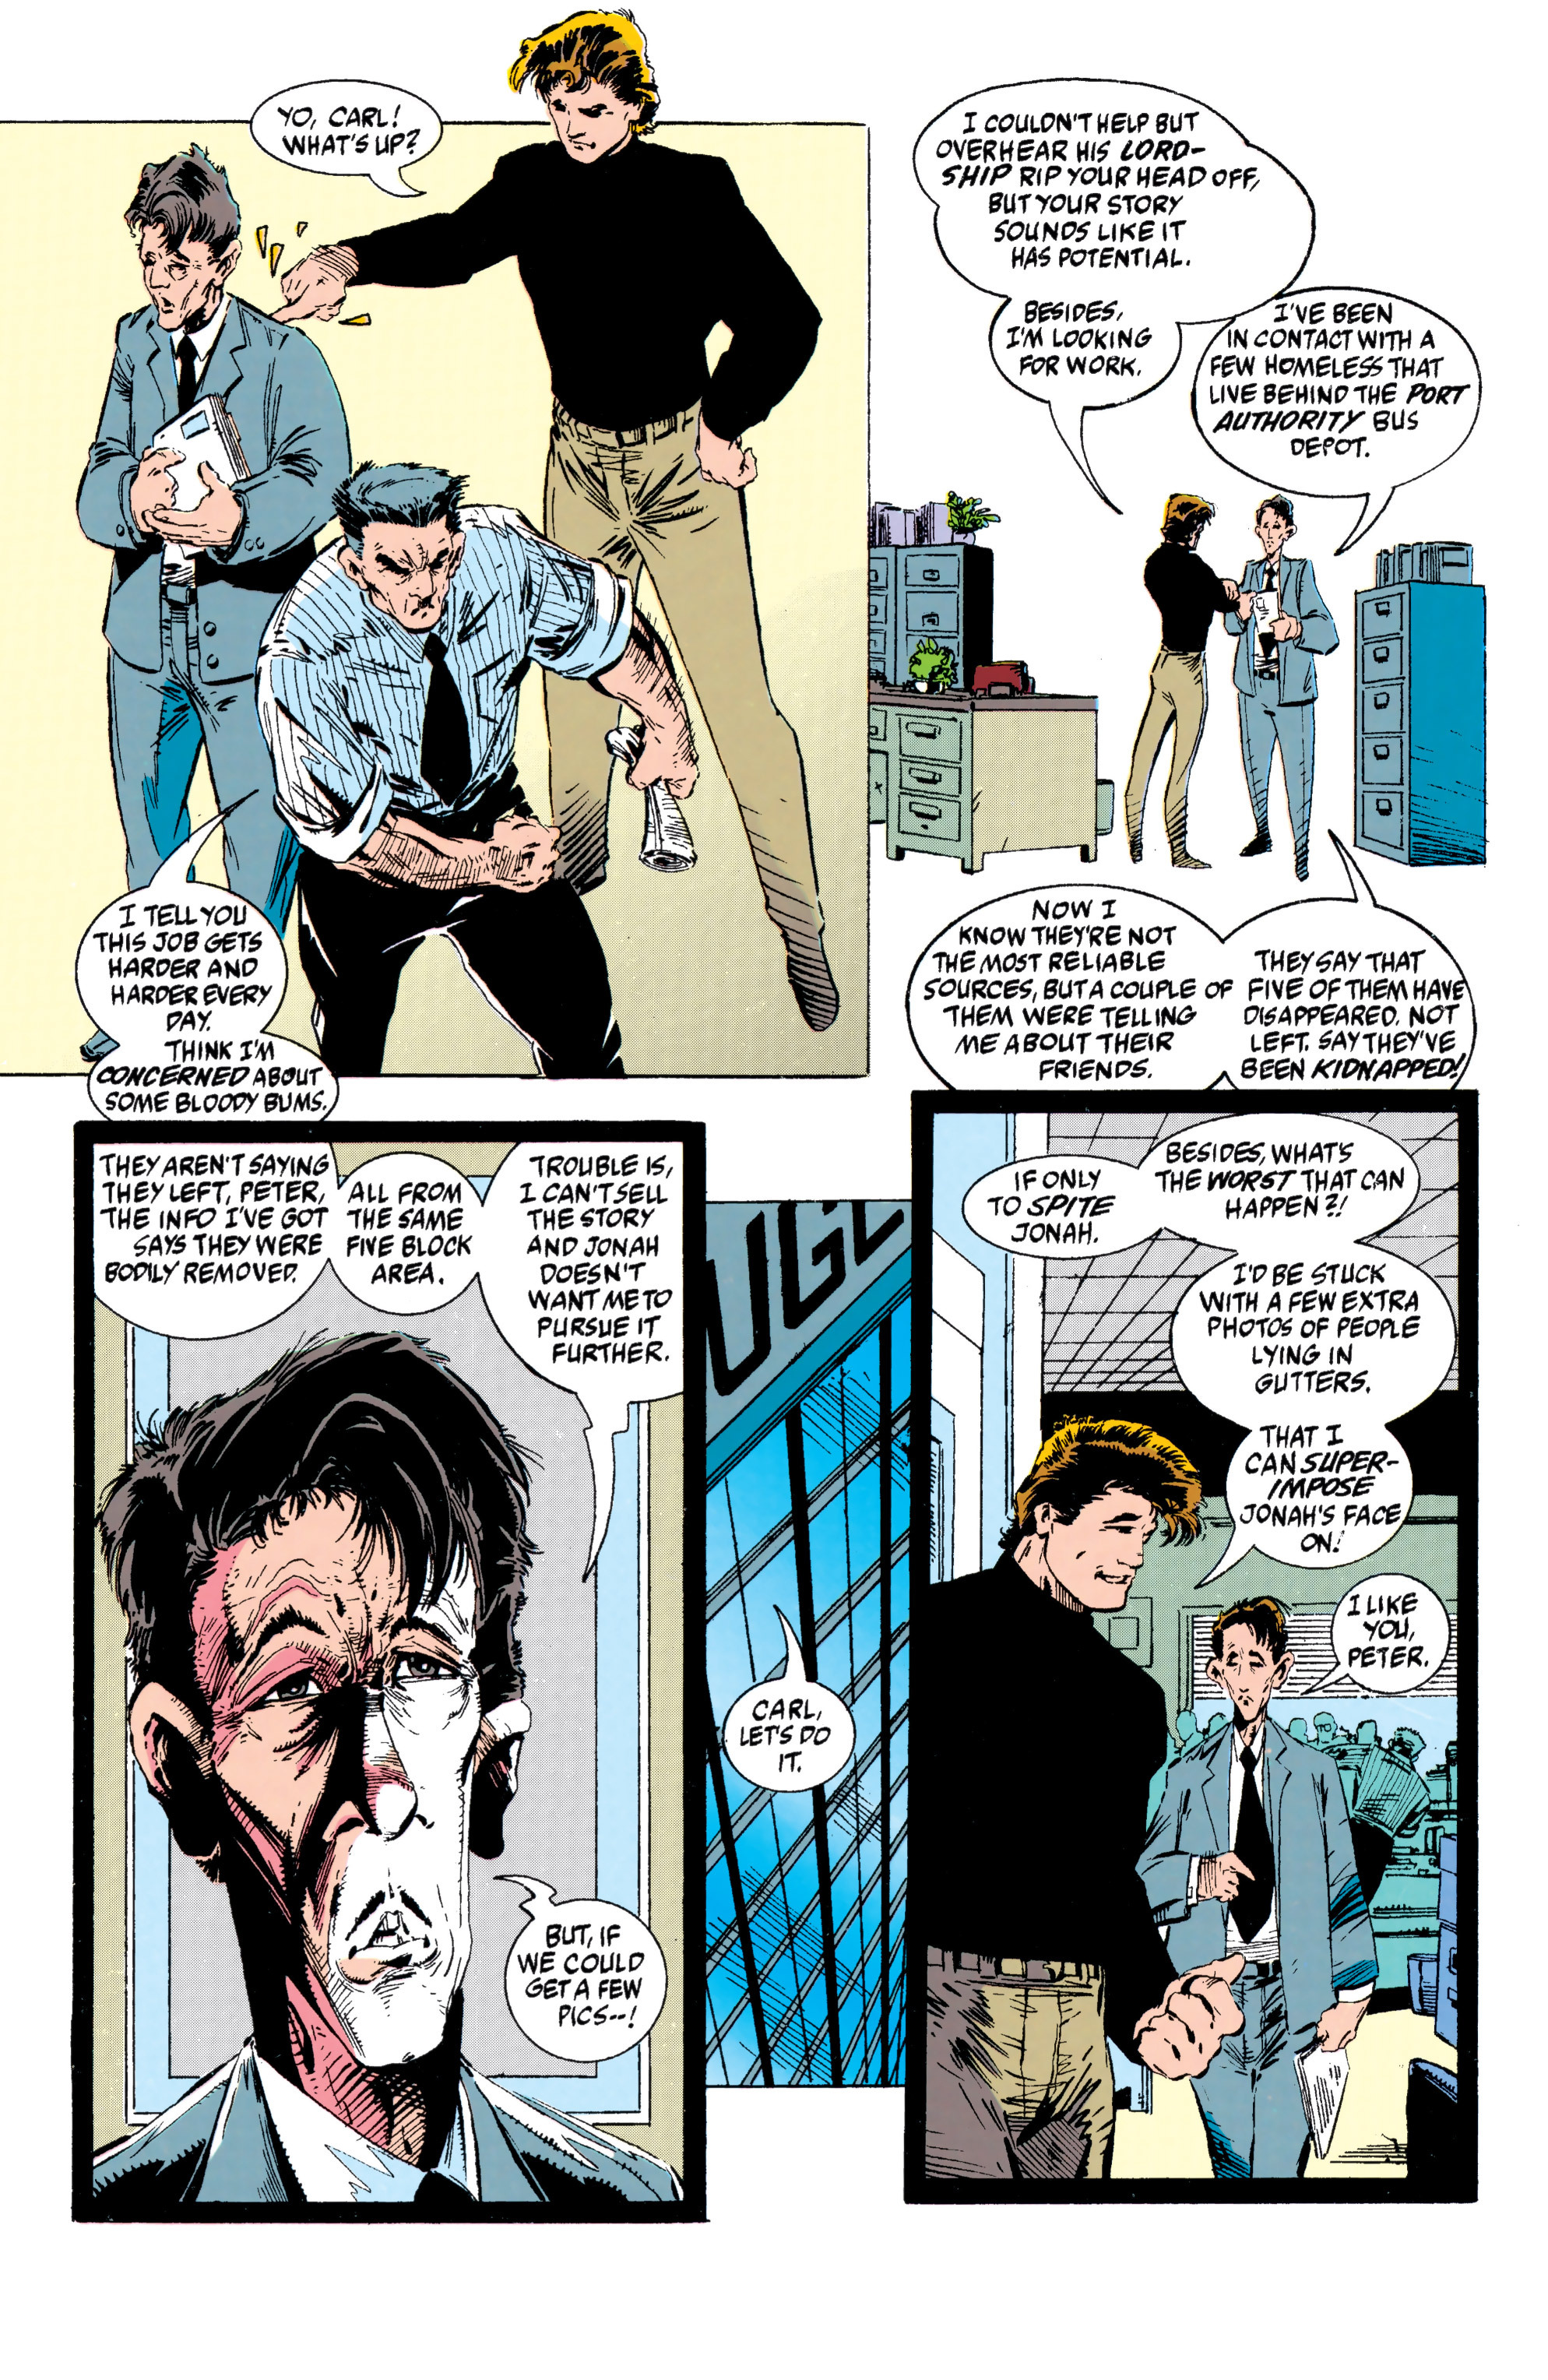 Spider-Man (1990) 13_-_Sub_City_Part_1_of_2 Page 7